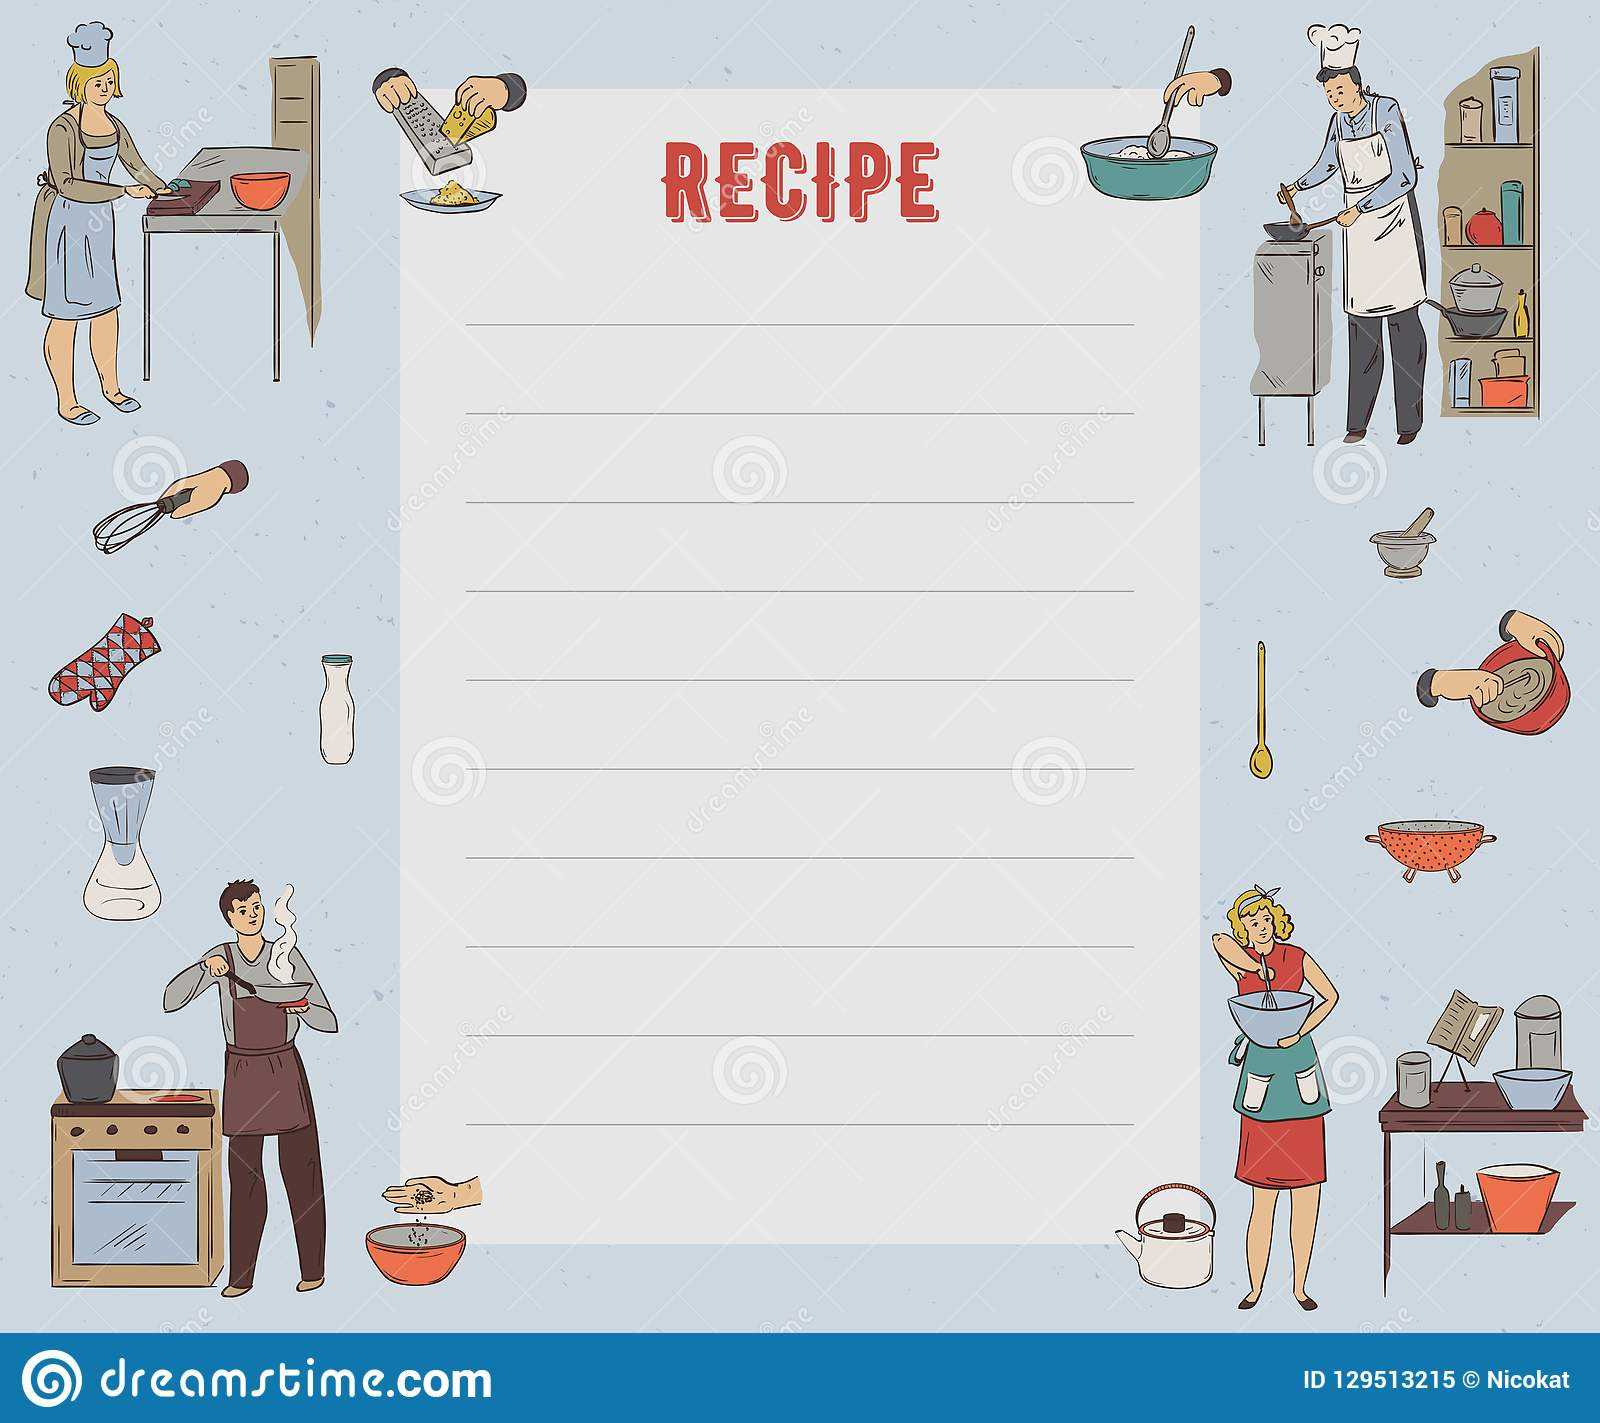 Recipe Card. Cookbook Page. Design Template With People With Regard To Restaurant Recipe Card Template